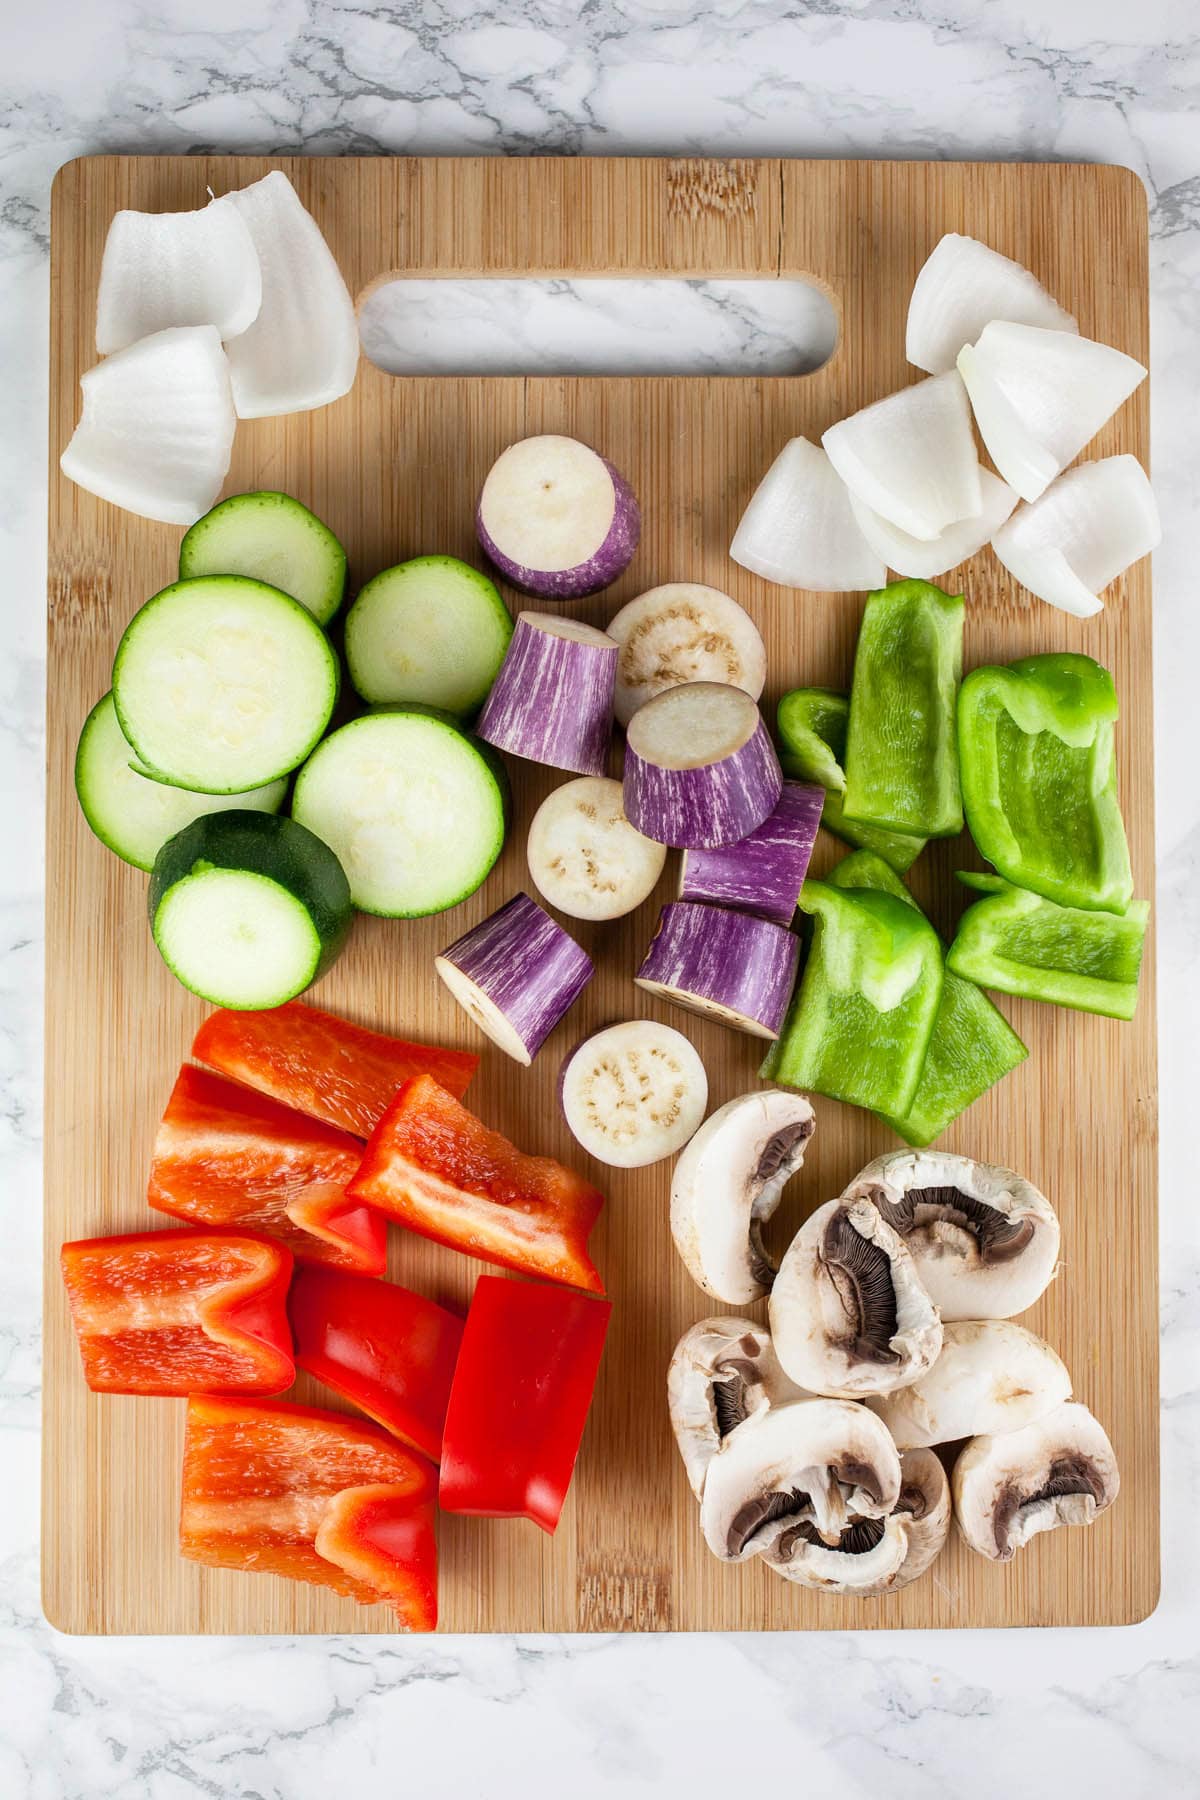 Red and green bell peppers, eggplant, mushrooms, zucchini, and onions on wooden cutting board.